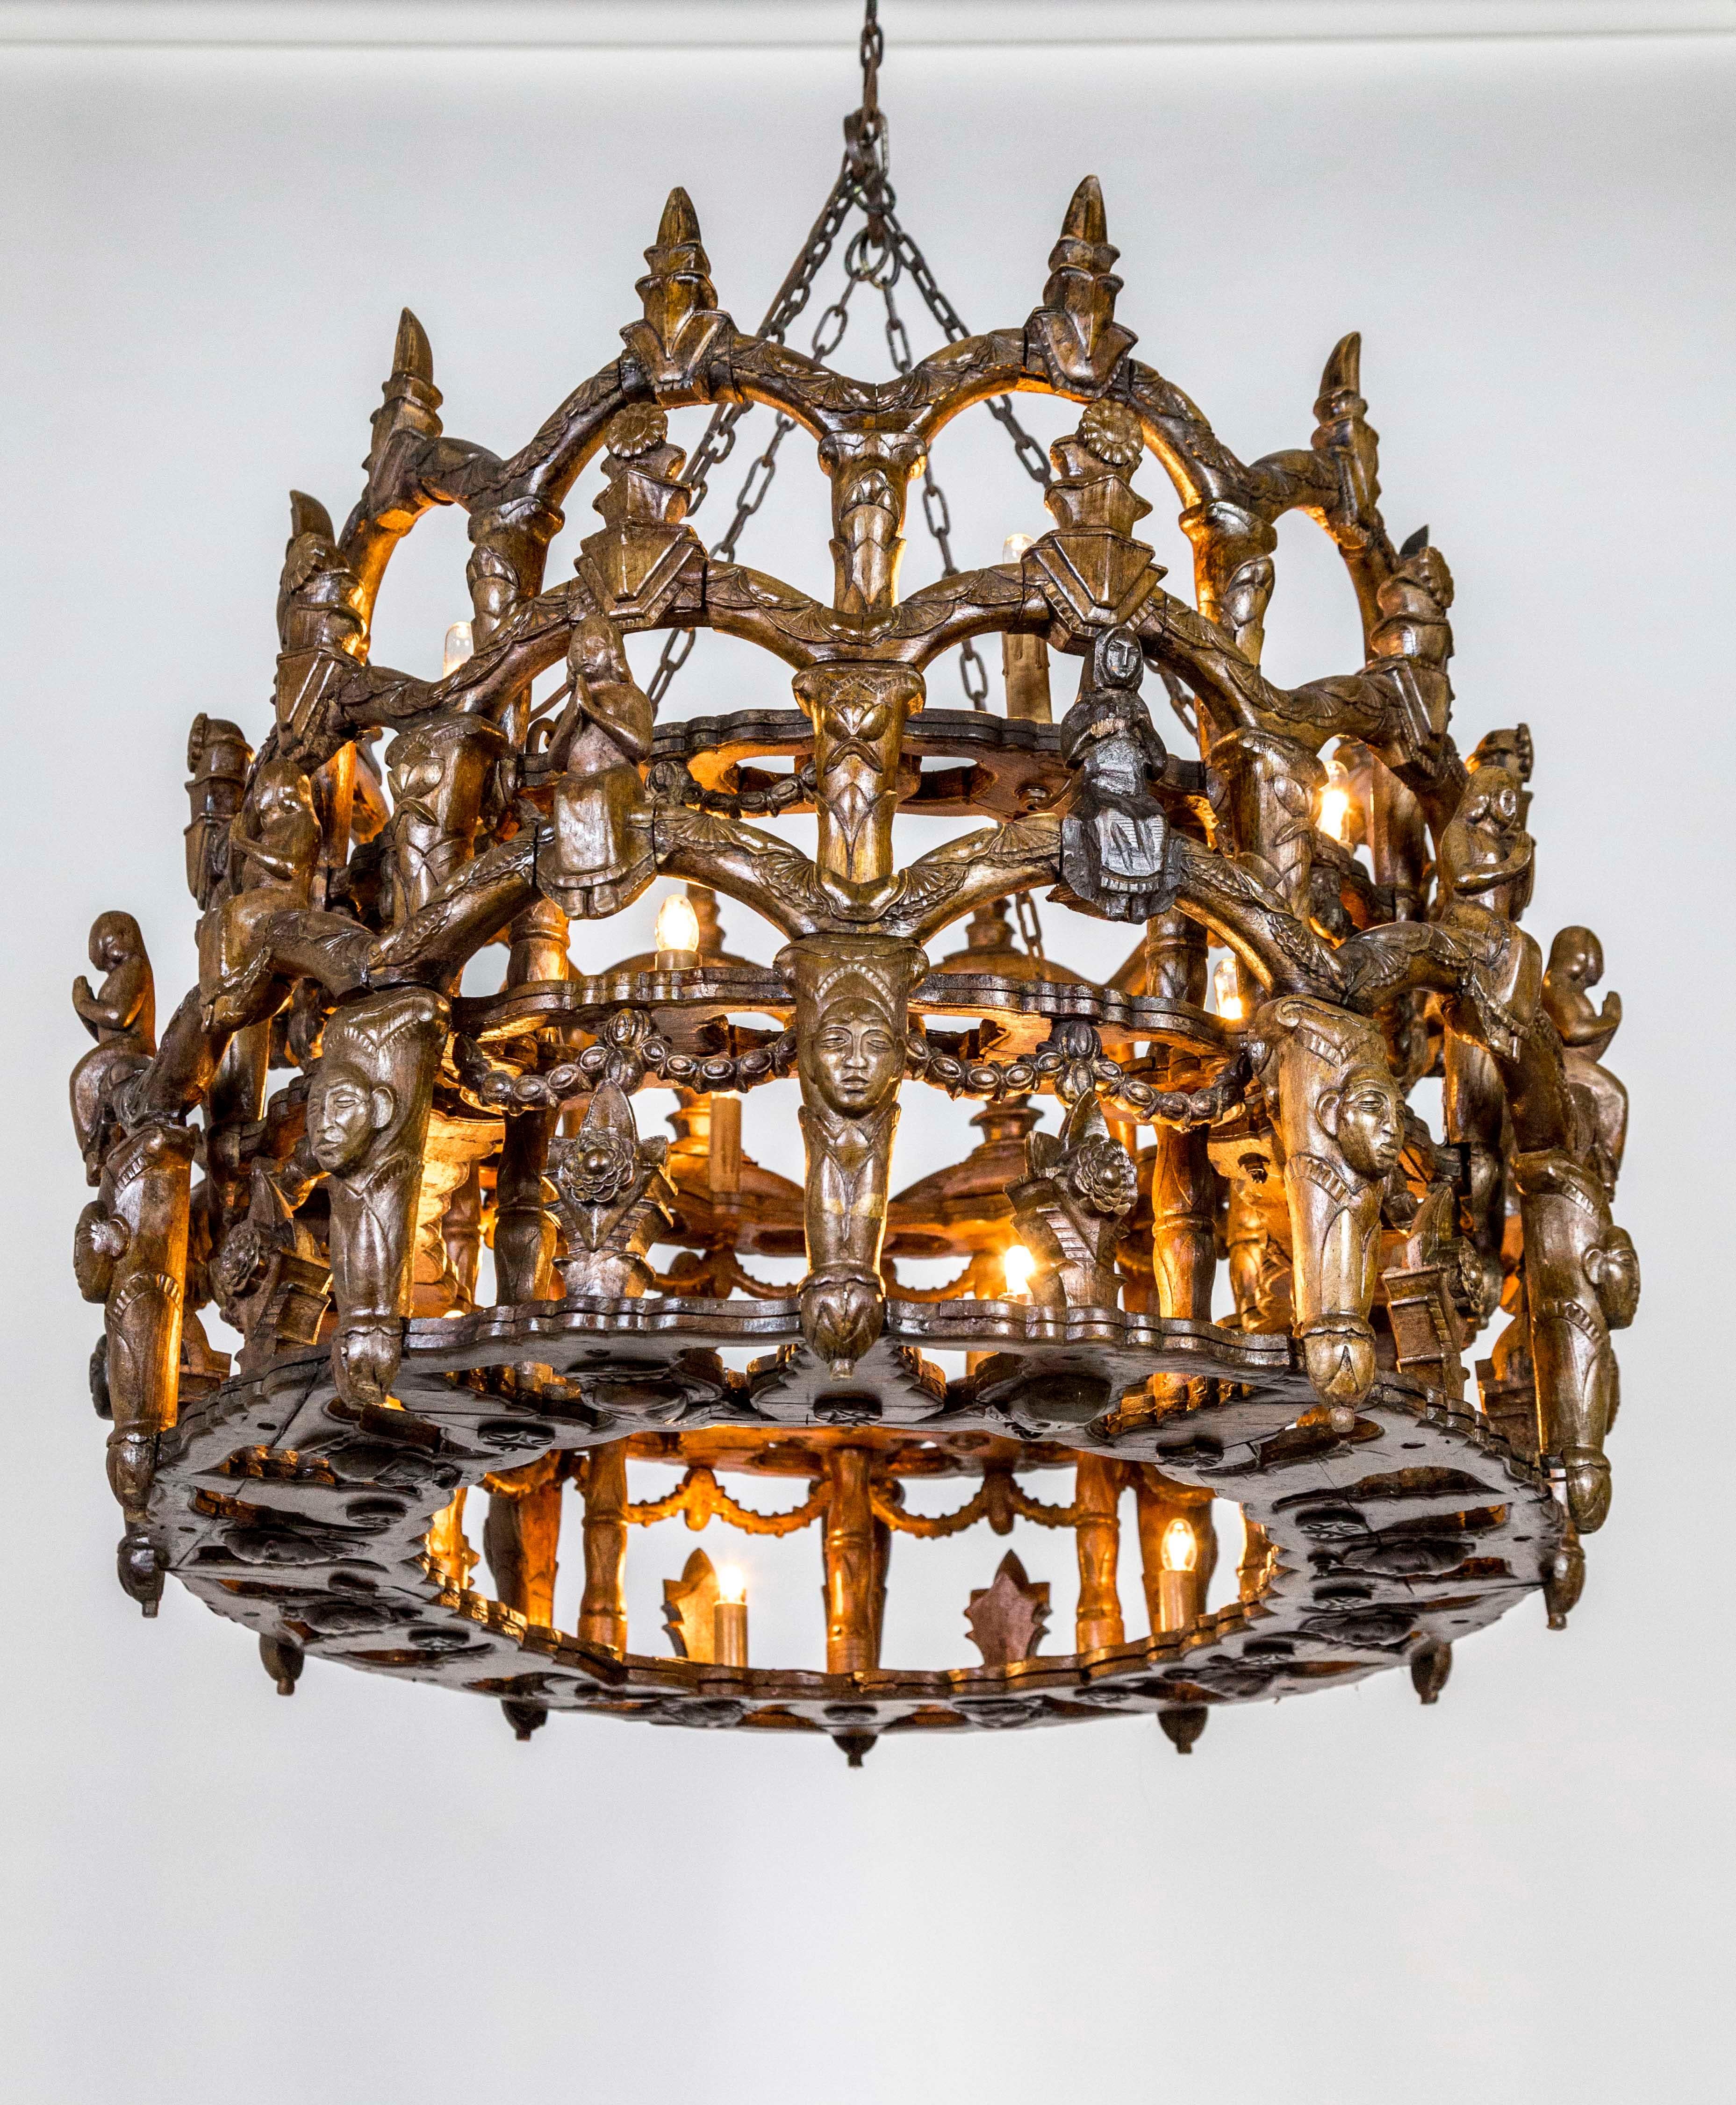 Carved Wooden S. American Folk Chandelier with Figures and Arches 4